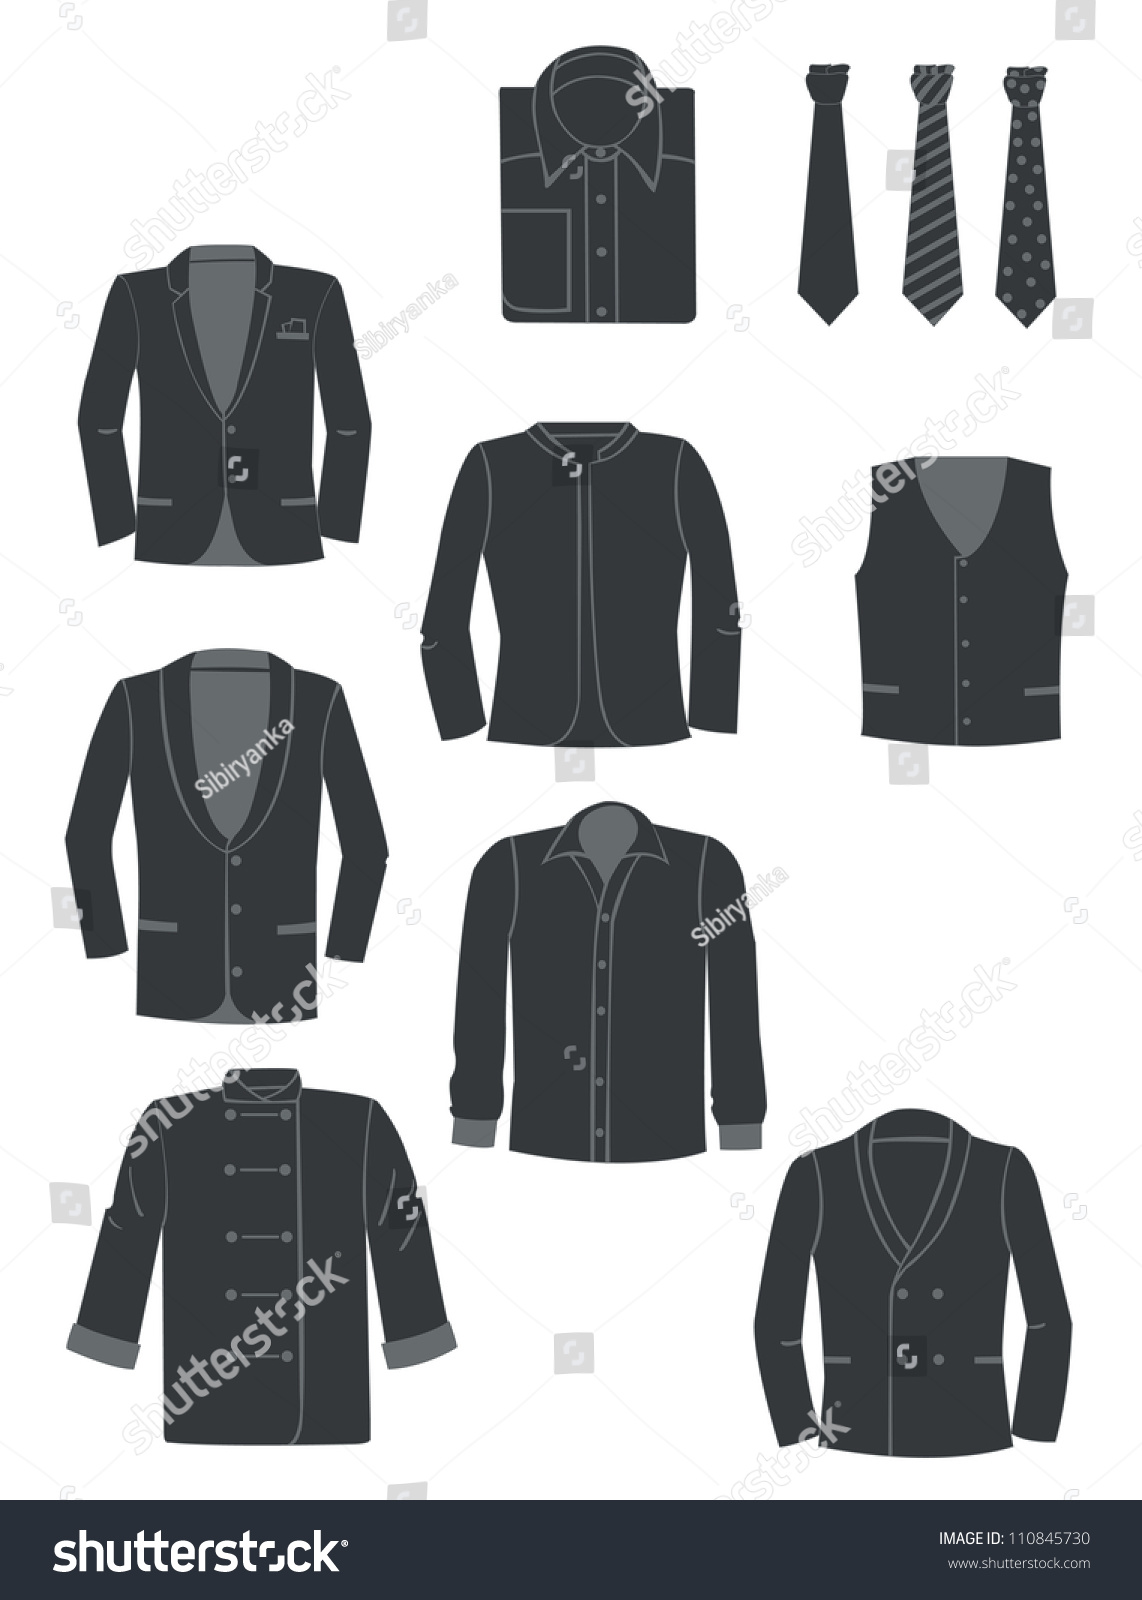 A Set Of Silhouettes Of Men'S Jackets, Shirts And Ties, Vector ...